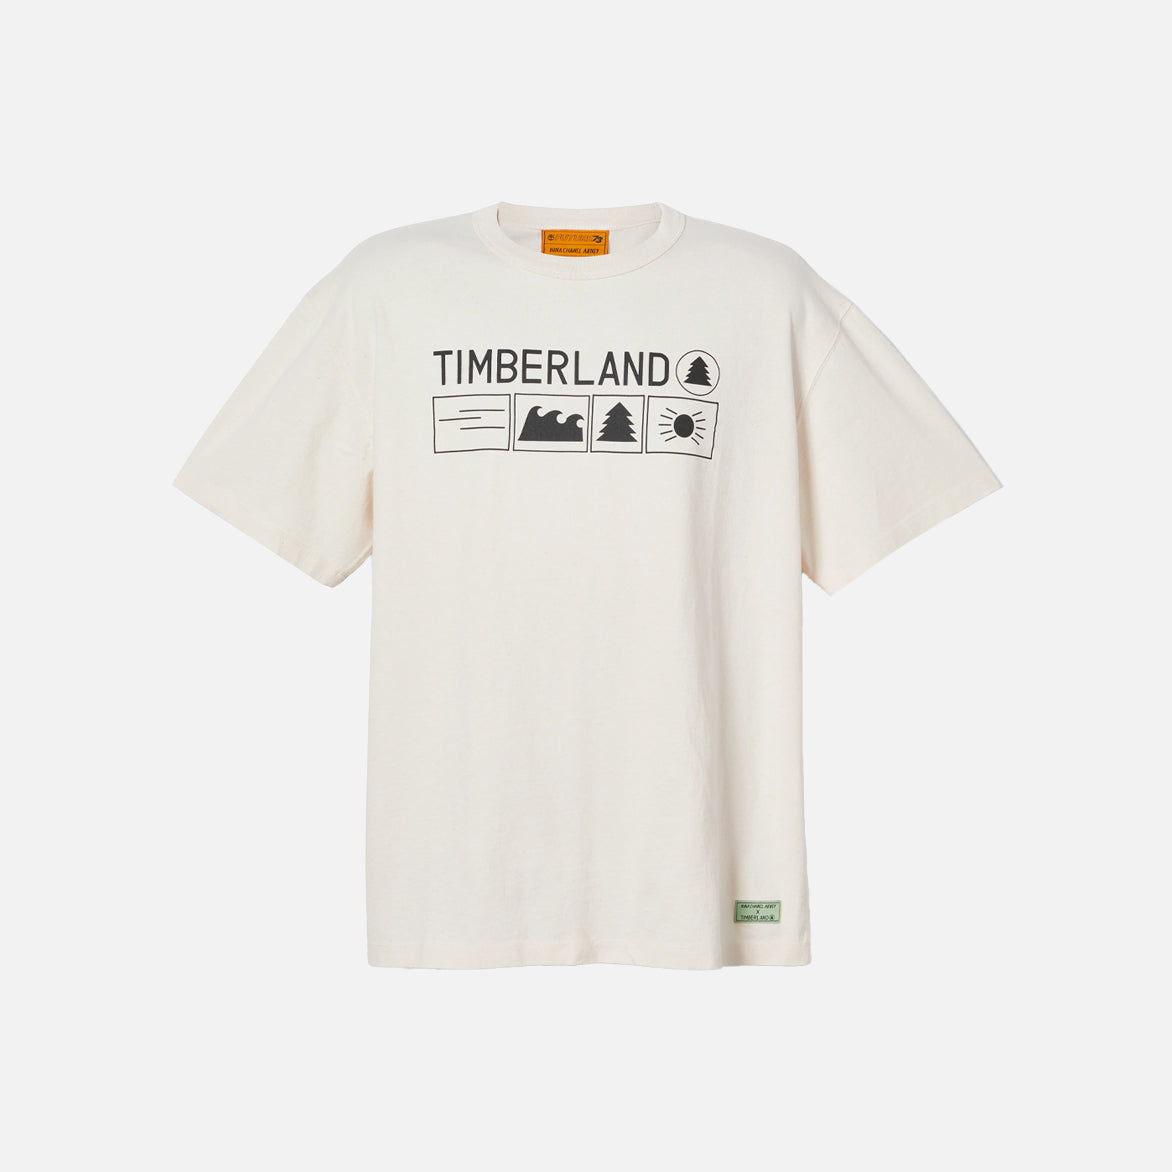 NINA CHANEL ABNEY X TIMBERLAND RELAXED FIT TEE - NATURAL